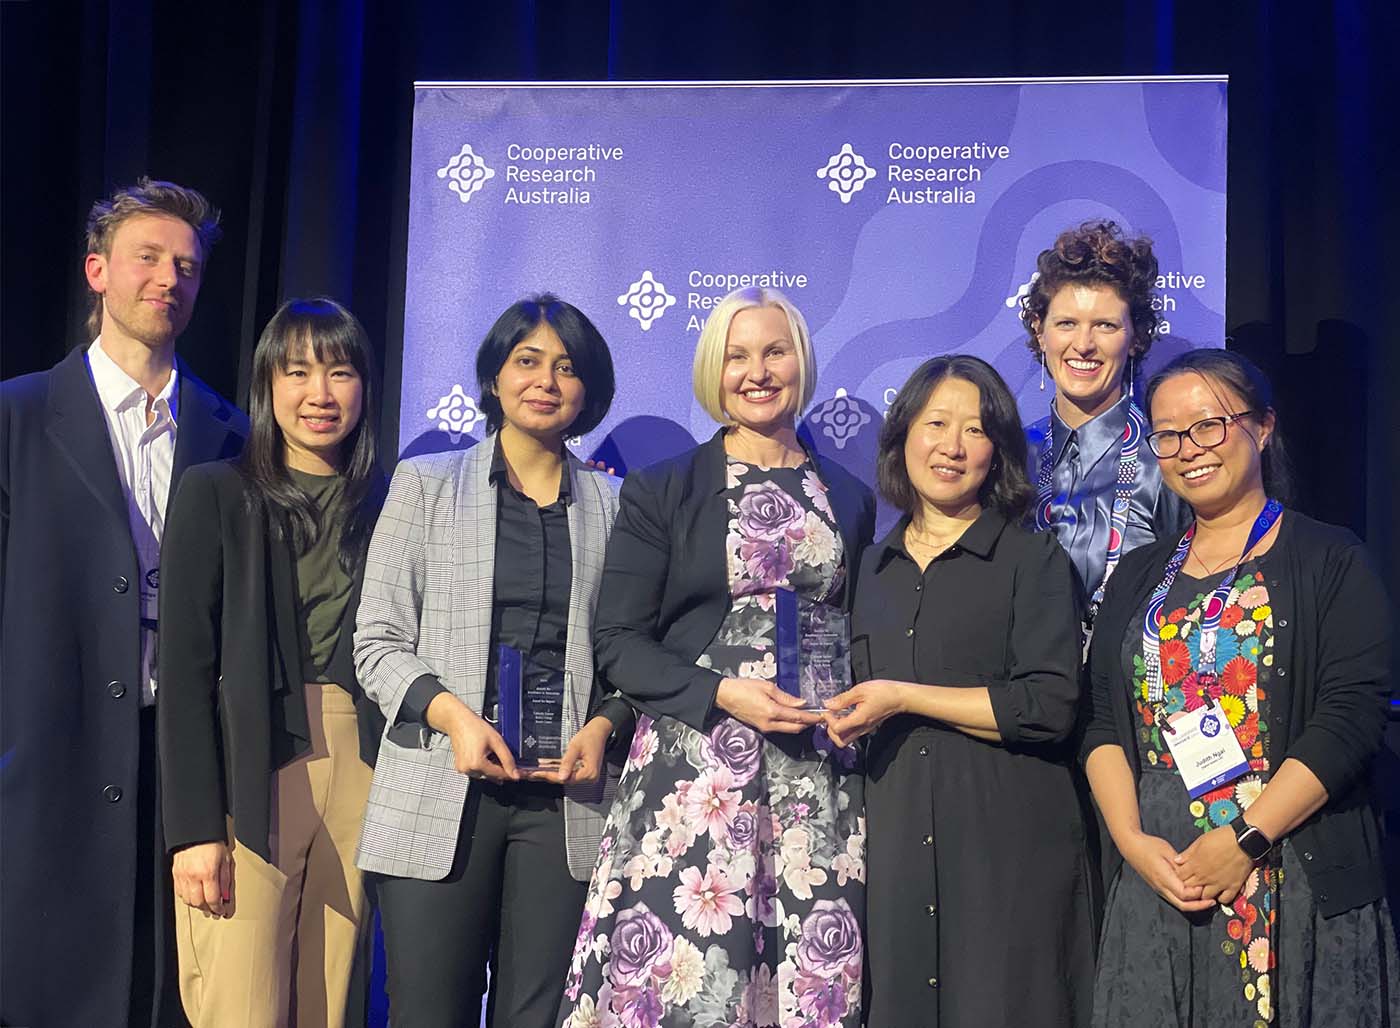 Alessandro Luongo (DHCRC), Hui Mathews (DHCRC), Dr Tabinda Sarwar (RMIT), Vickie Irving (Telstra Health), Dr Jocelyn Ling (DHCRC), Dr Clare Morgan (DHCRC), Judith Ngai (DHCRC) at the Cooperative Research Australia awards in Brisbane.